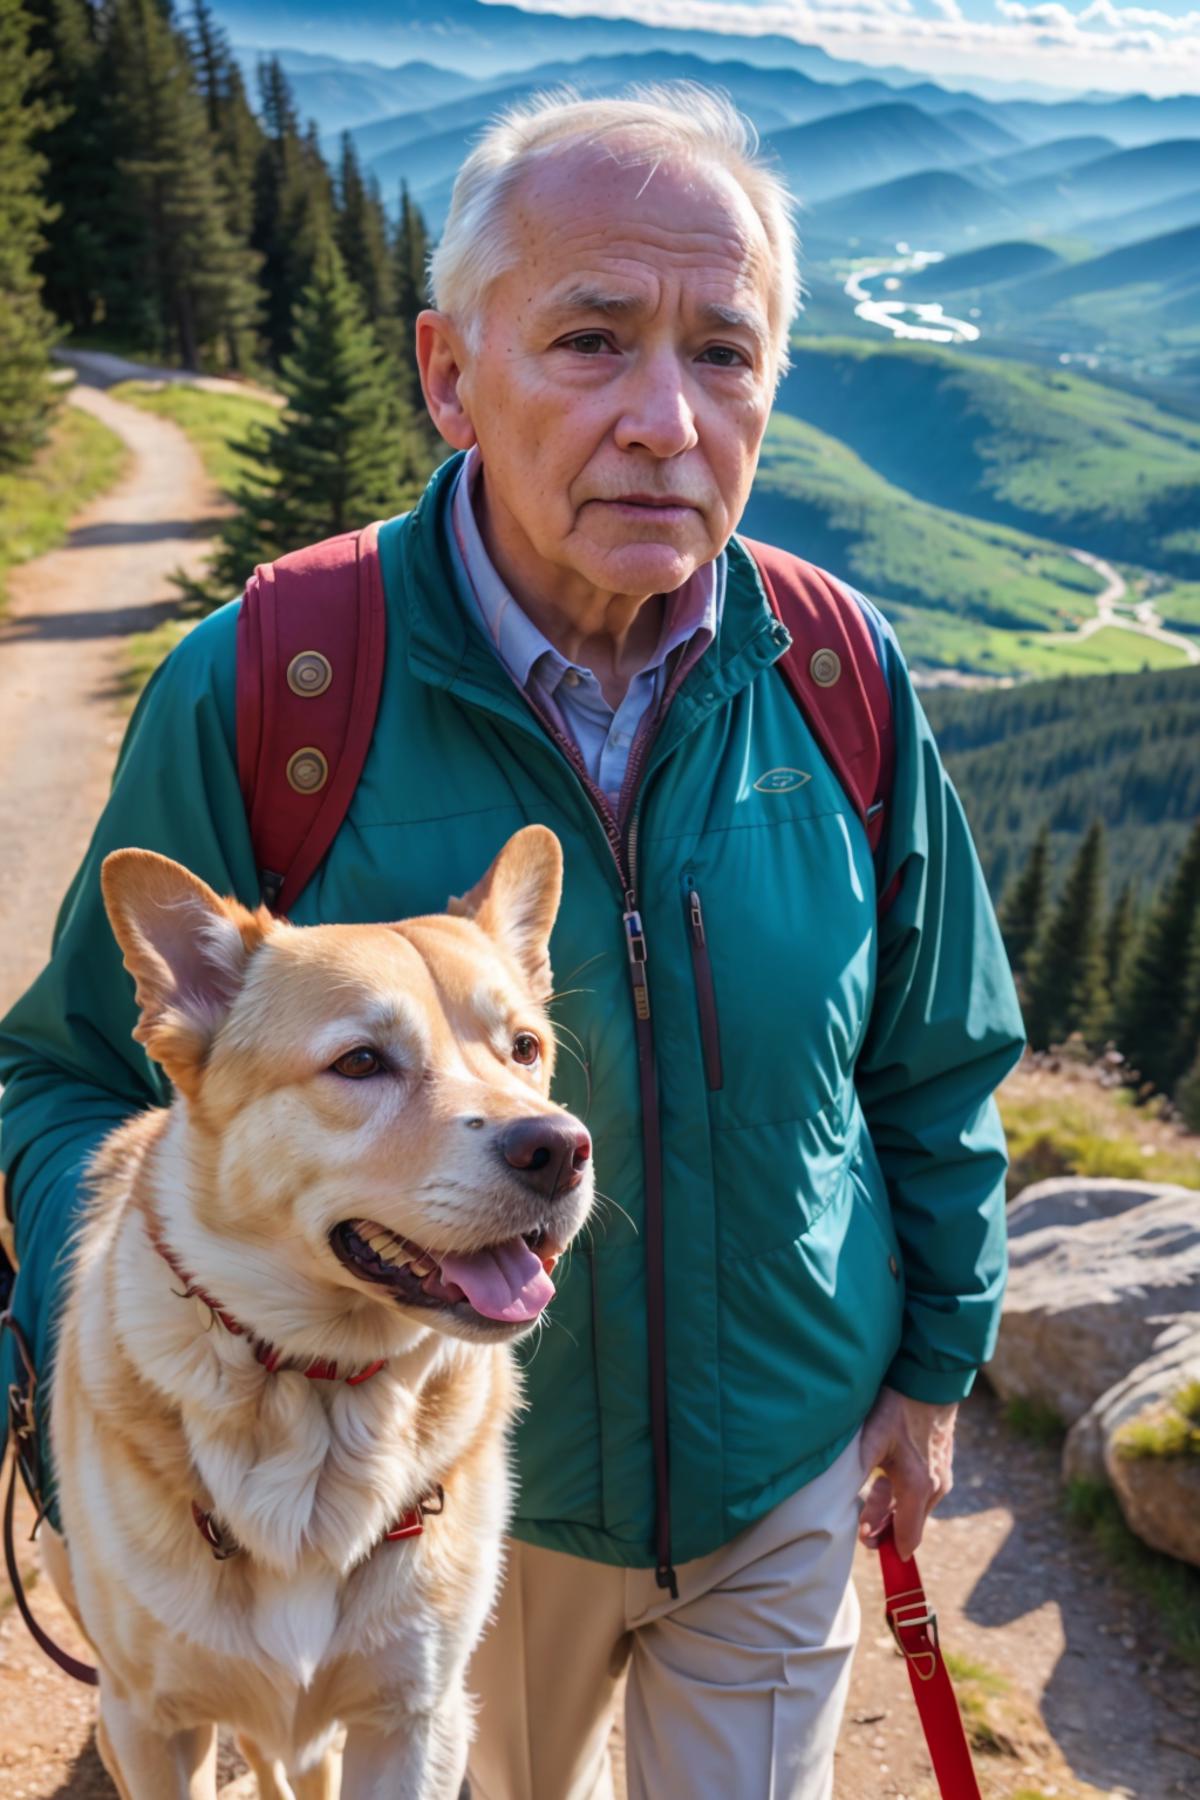 from_front facing viewer looking at viewer old man walking dog on mountain trail boots bright morning sunlight
(masterpiec...